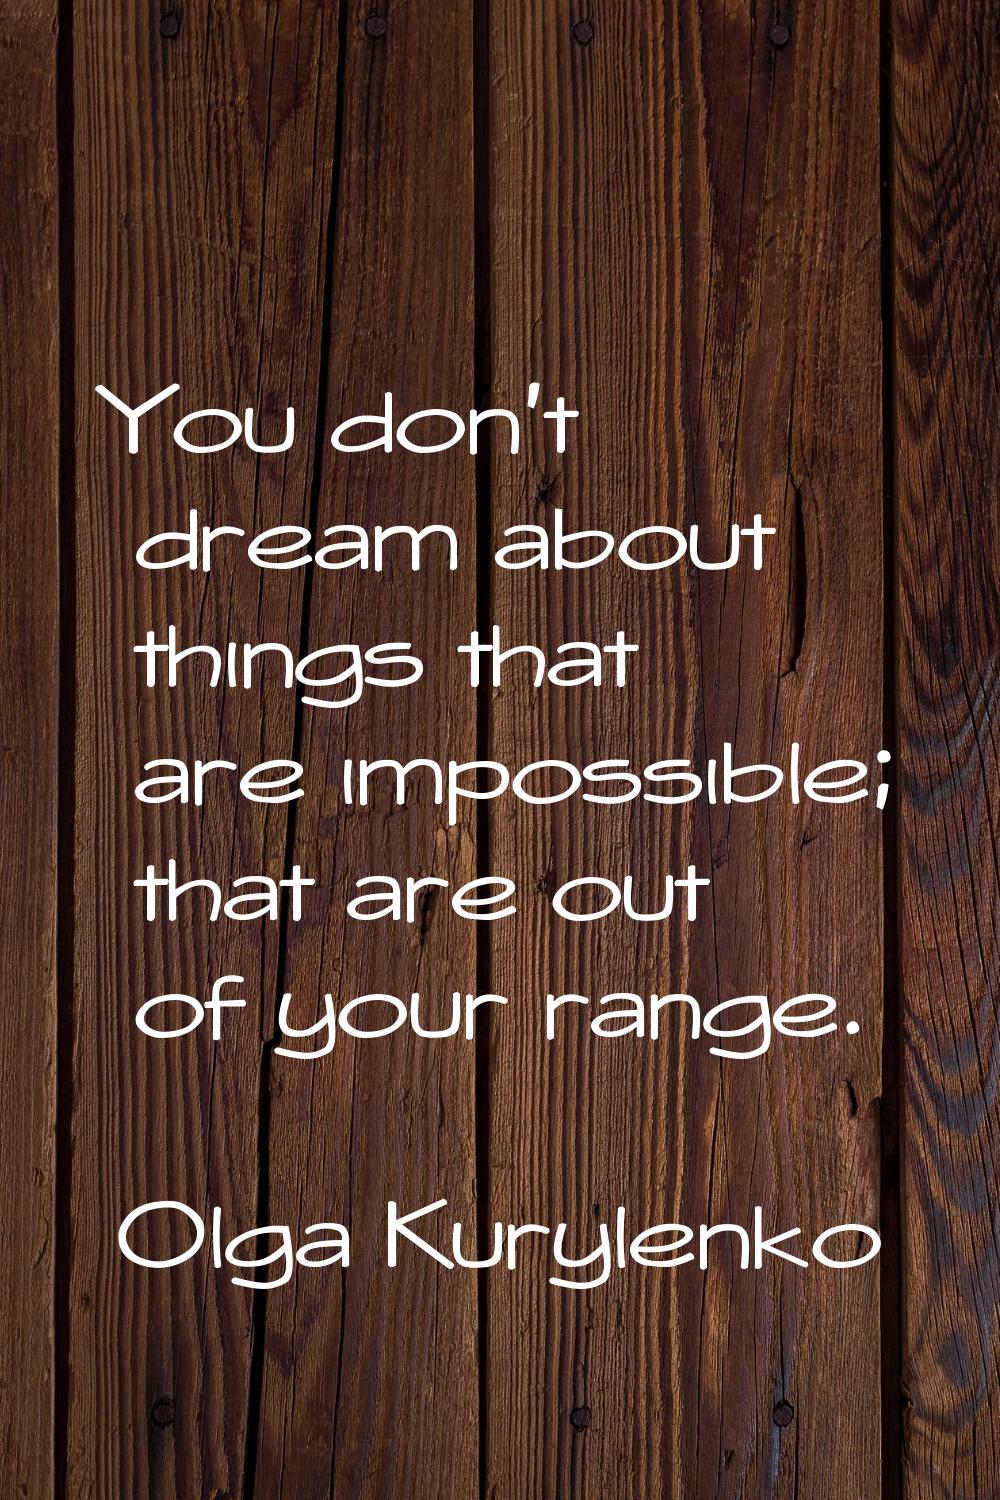 You don't dream about things that are impossible; that are out of your range.